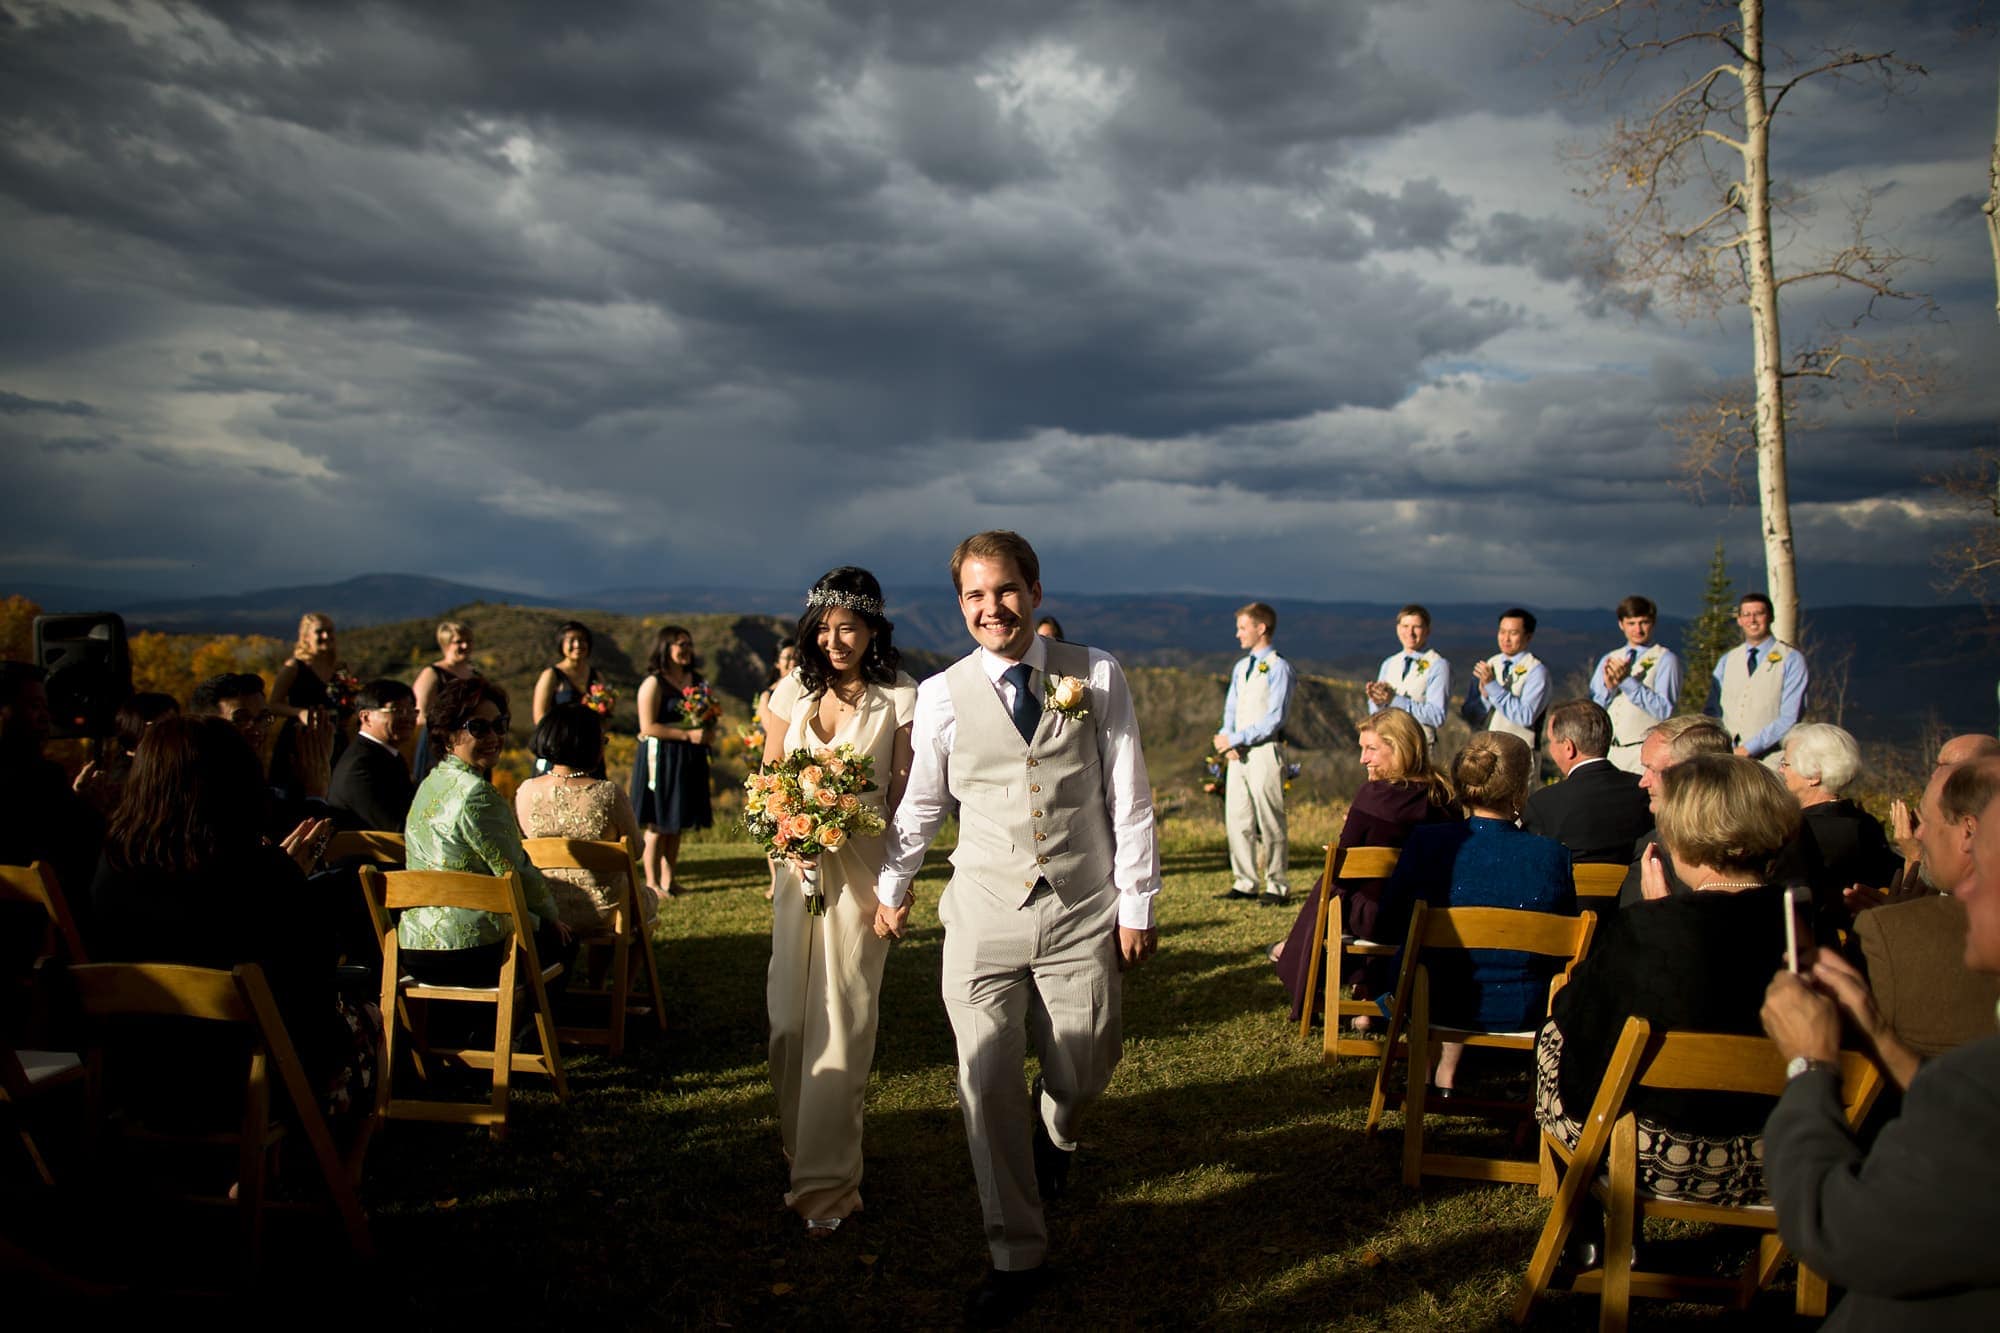 The newly married couple walk back down the aisle after their Lynn Britt Cabin wedding ceremony in Snowmass Village near Aspen, Colorado.